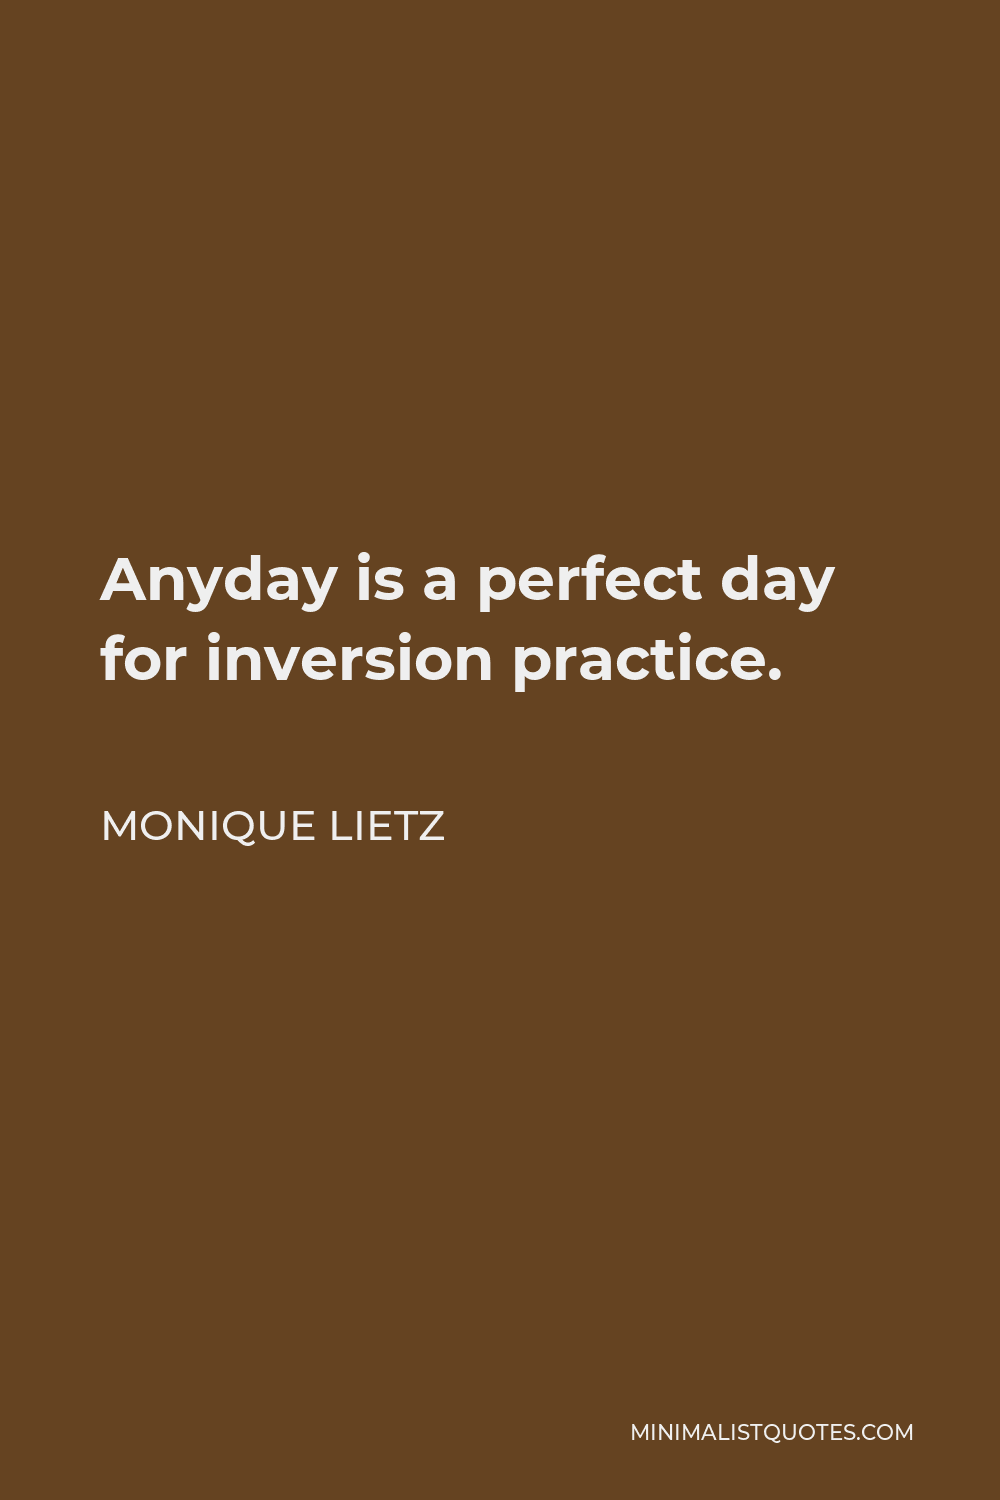 Monique Lietz Quote - Anyday is a perfect day for inversion practice.